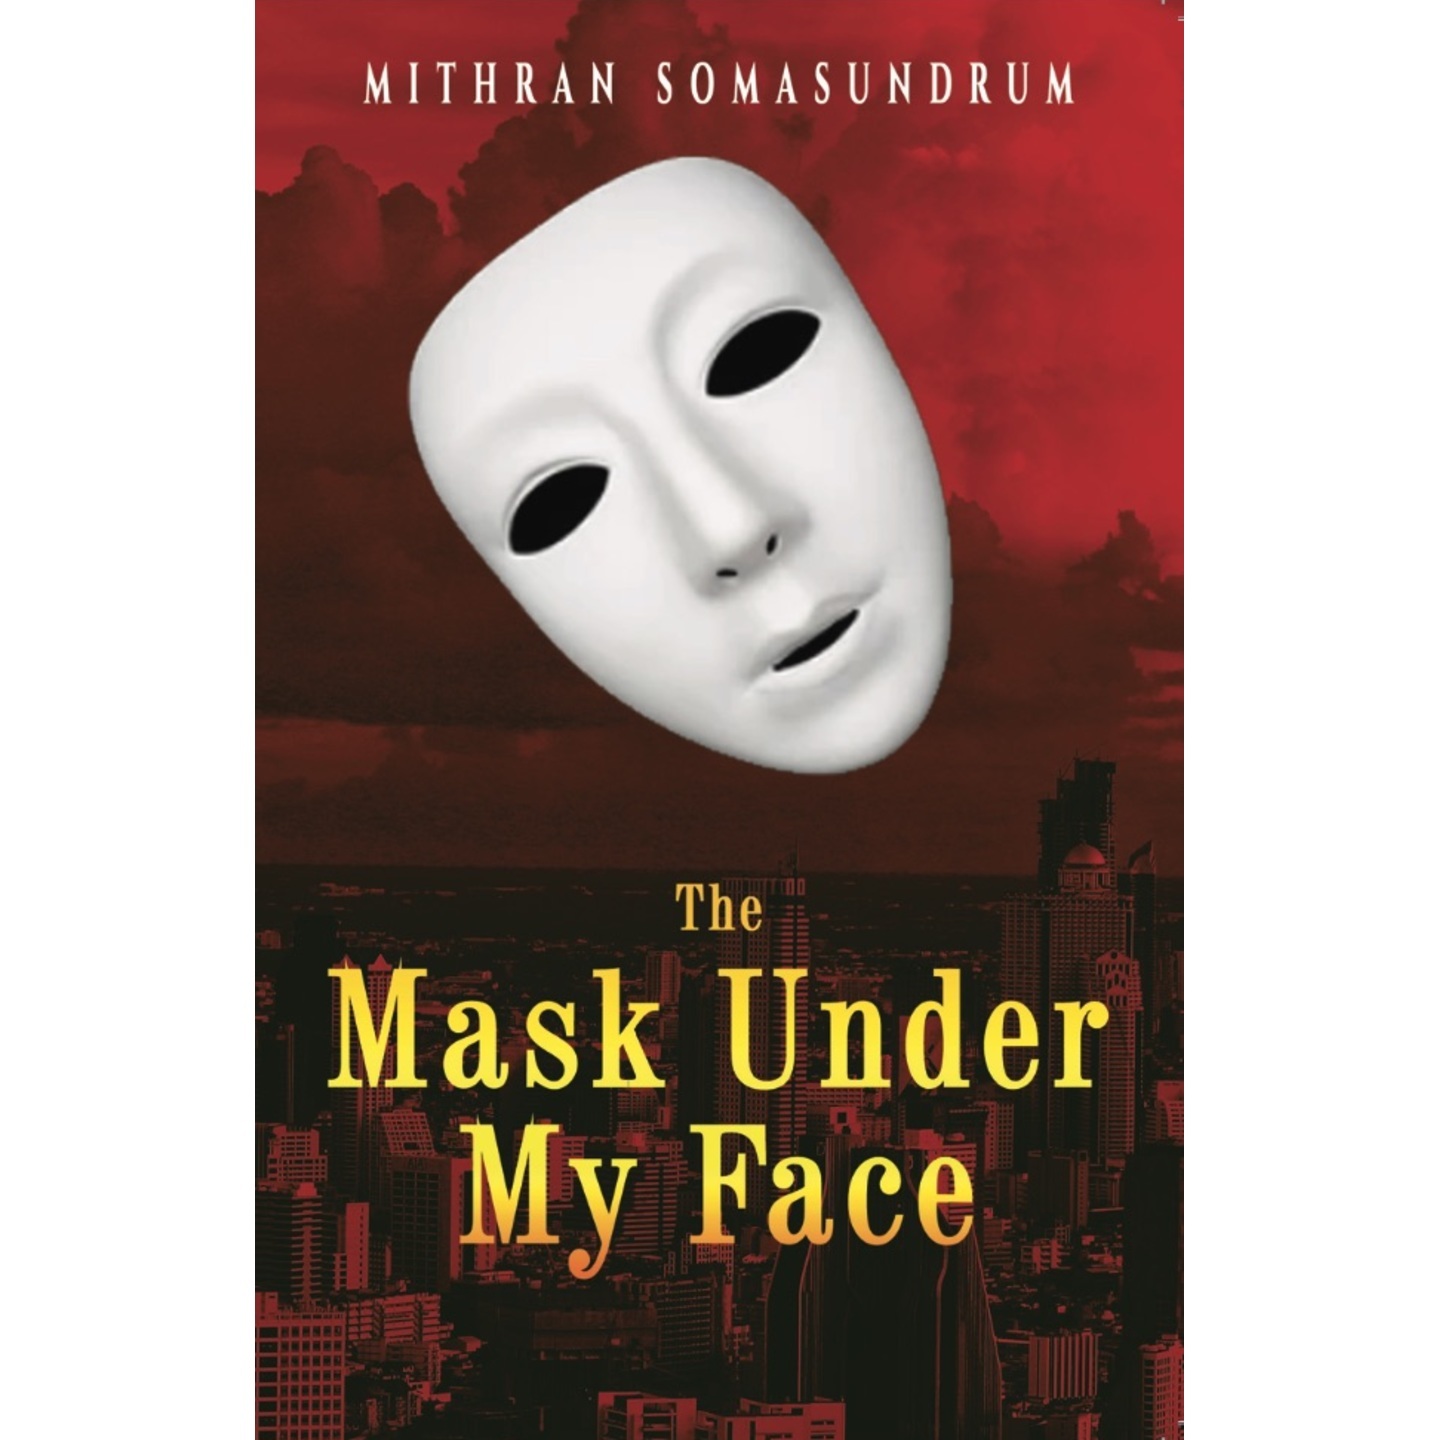 The Mask Under My Face by Mithran Somasundrum